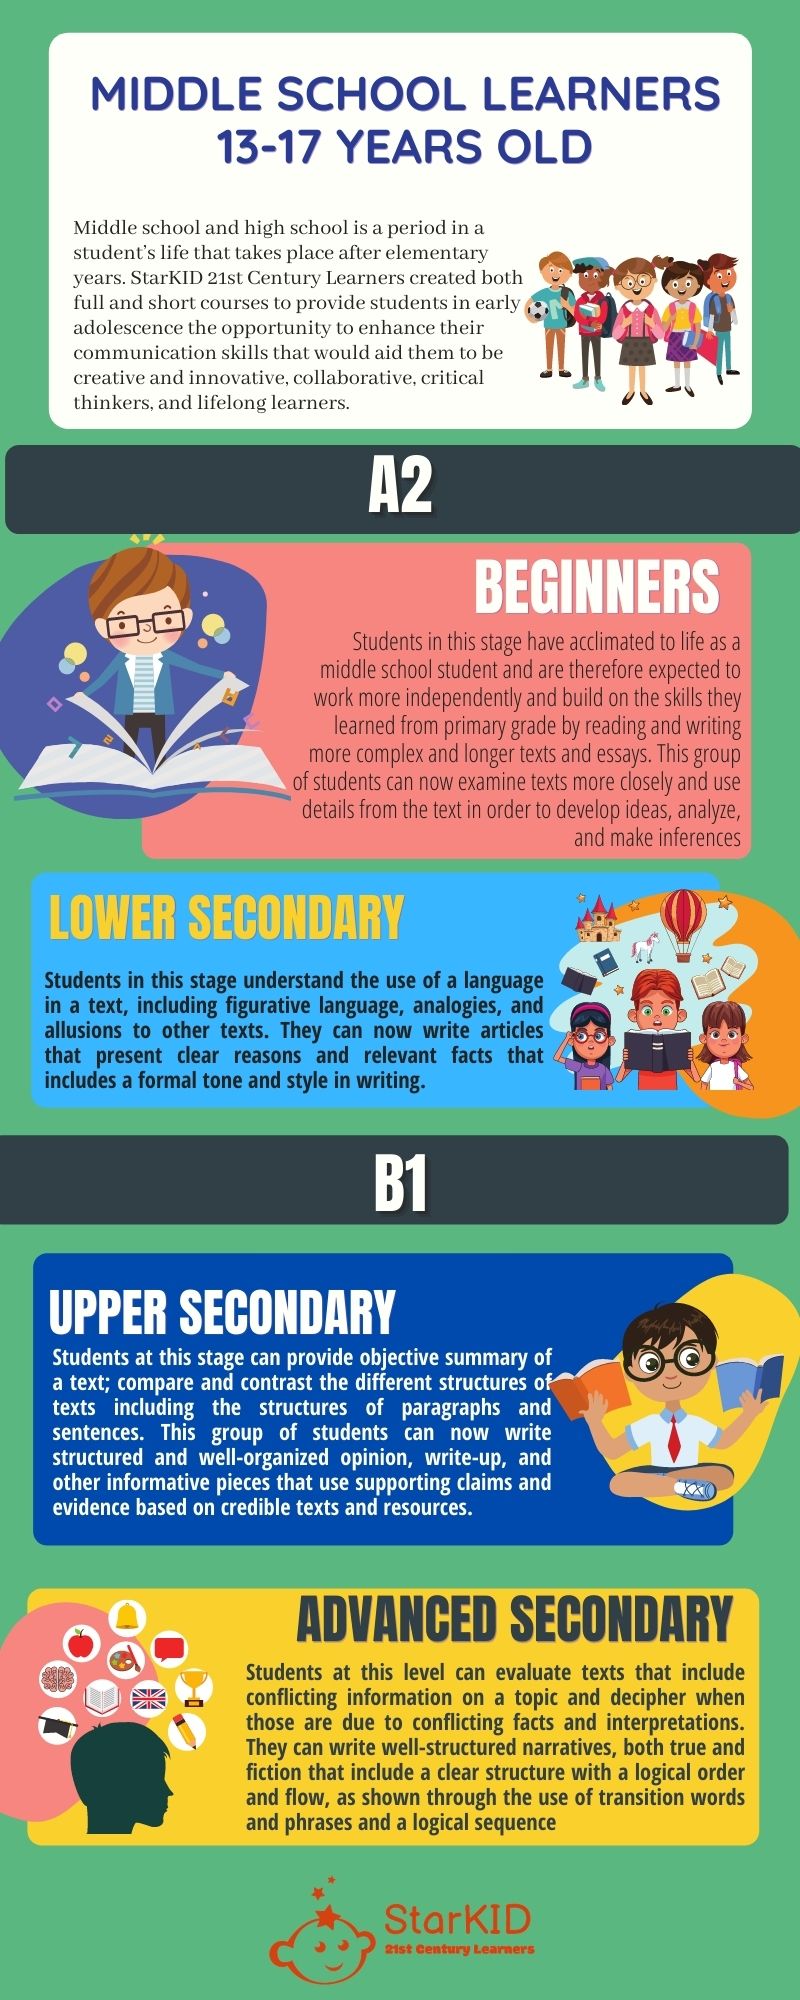 Educational Technology Classroom Agreements Infographic.jpg